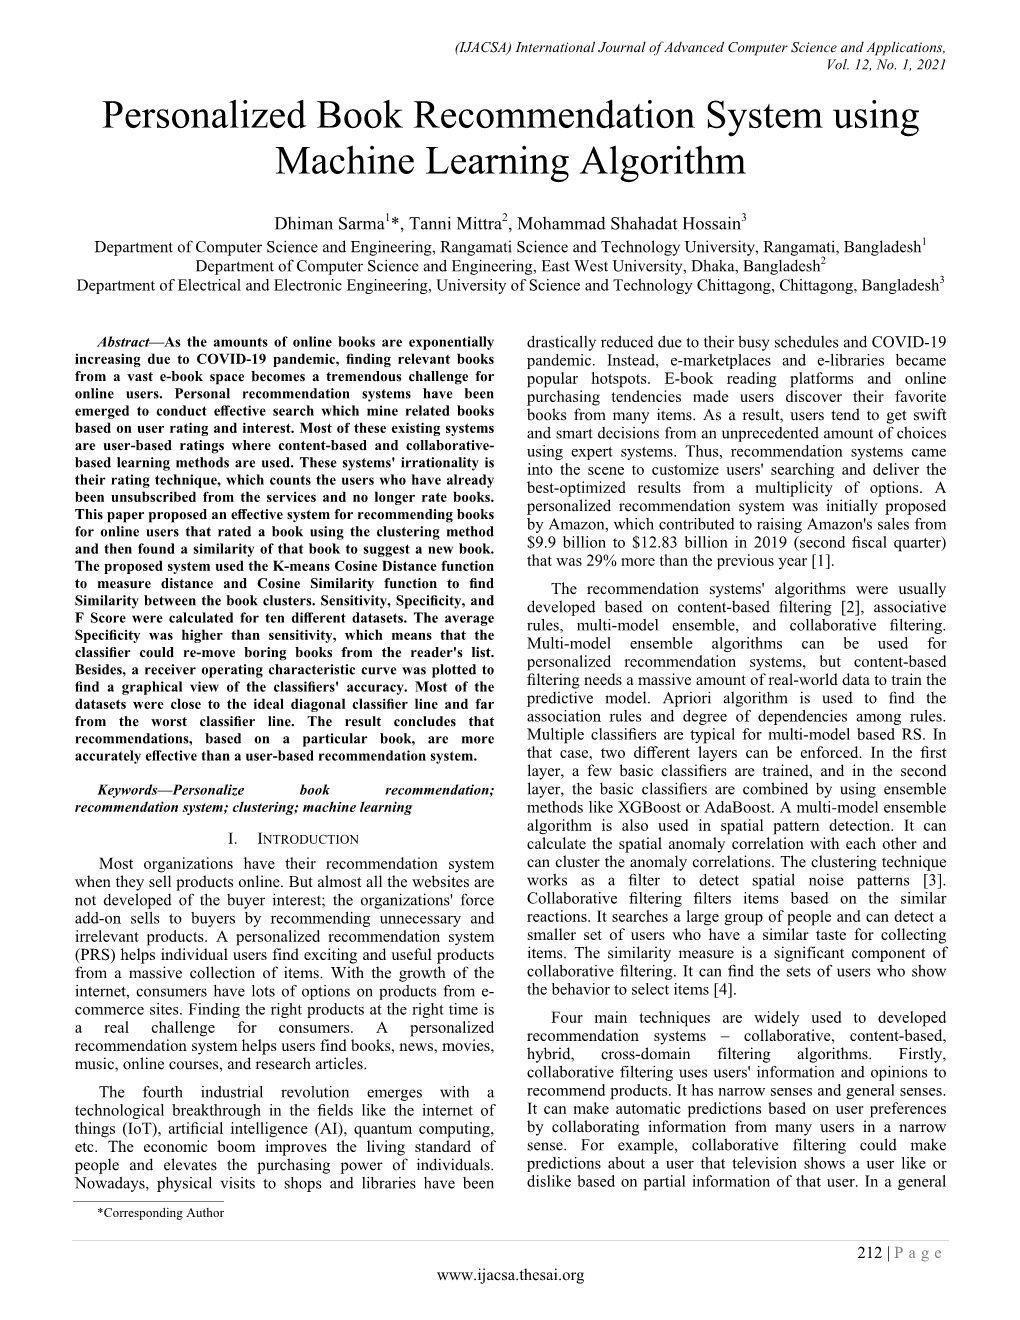 Personalized Book Recommendation System Using Machine Learning Algorithm